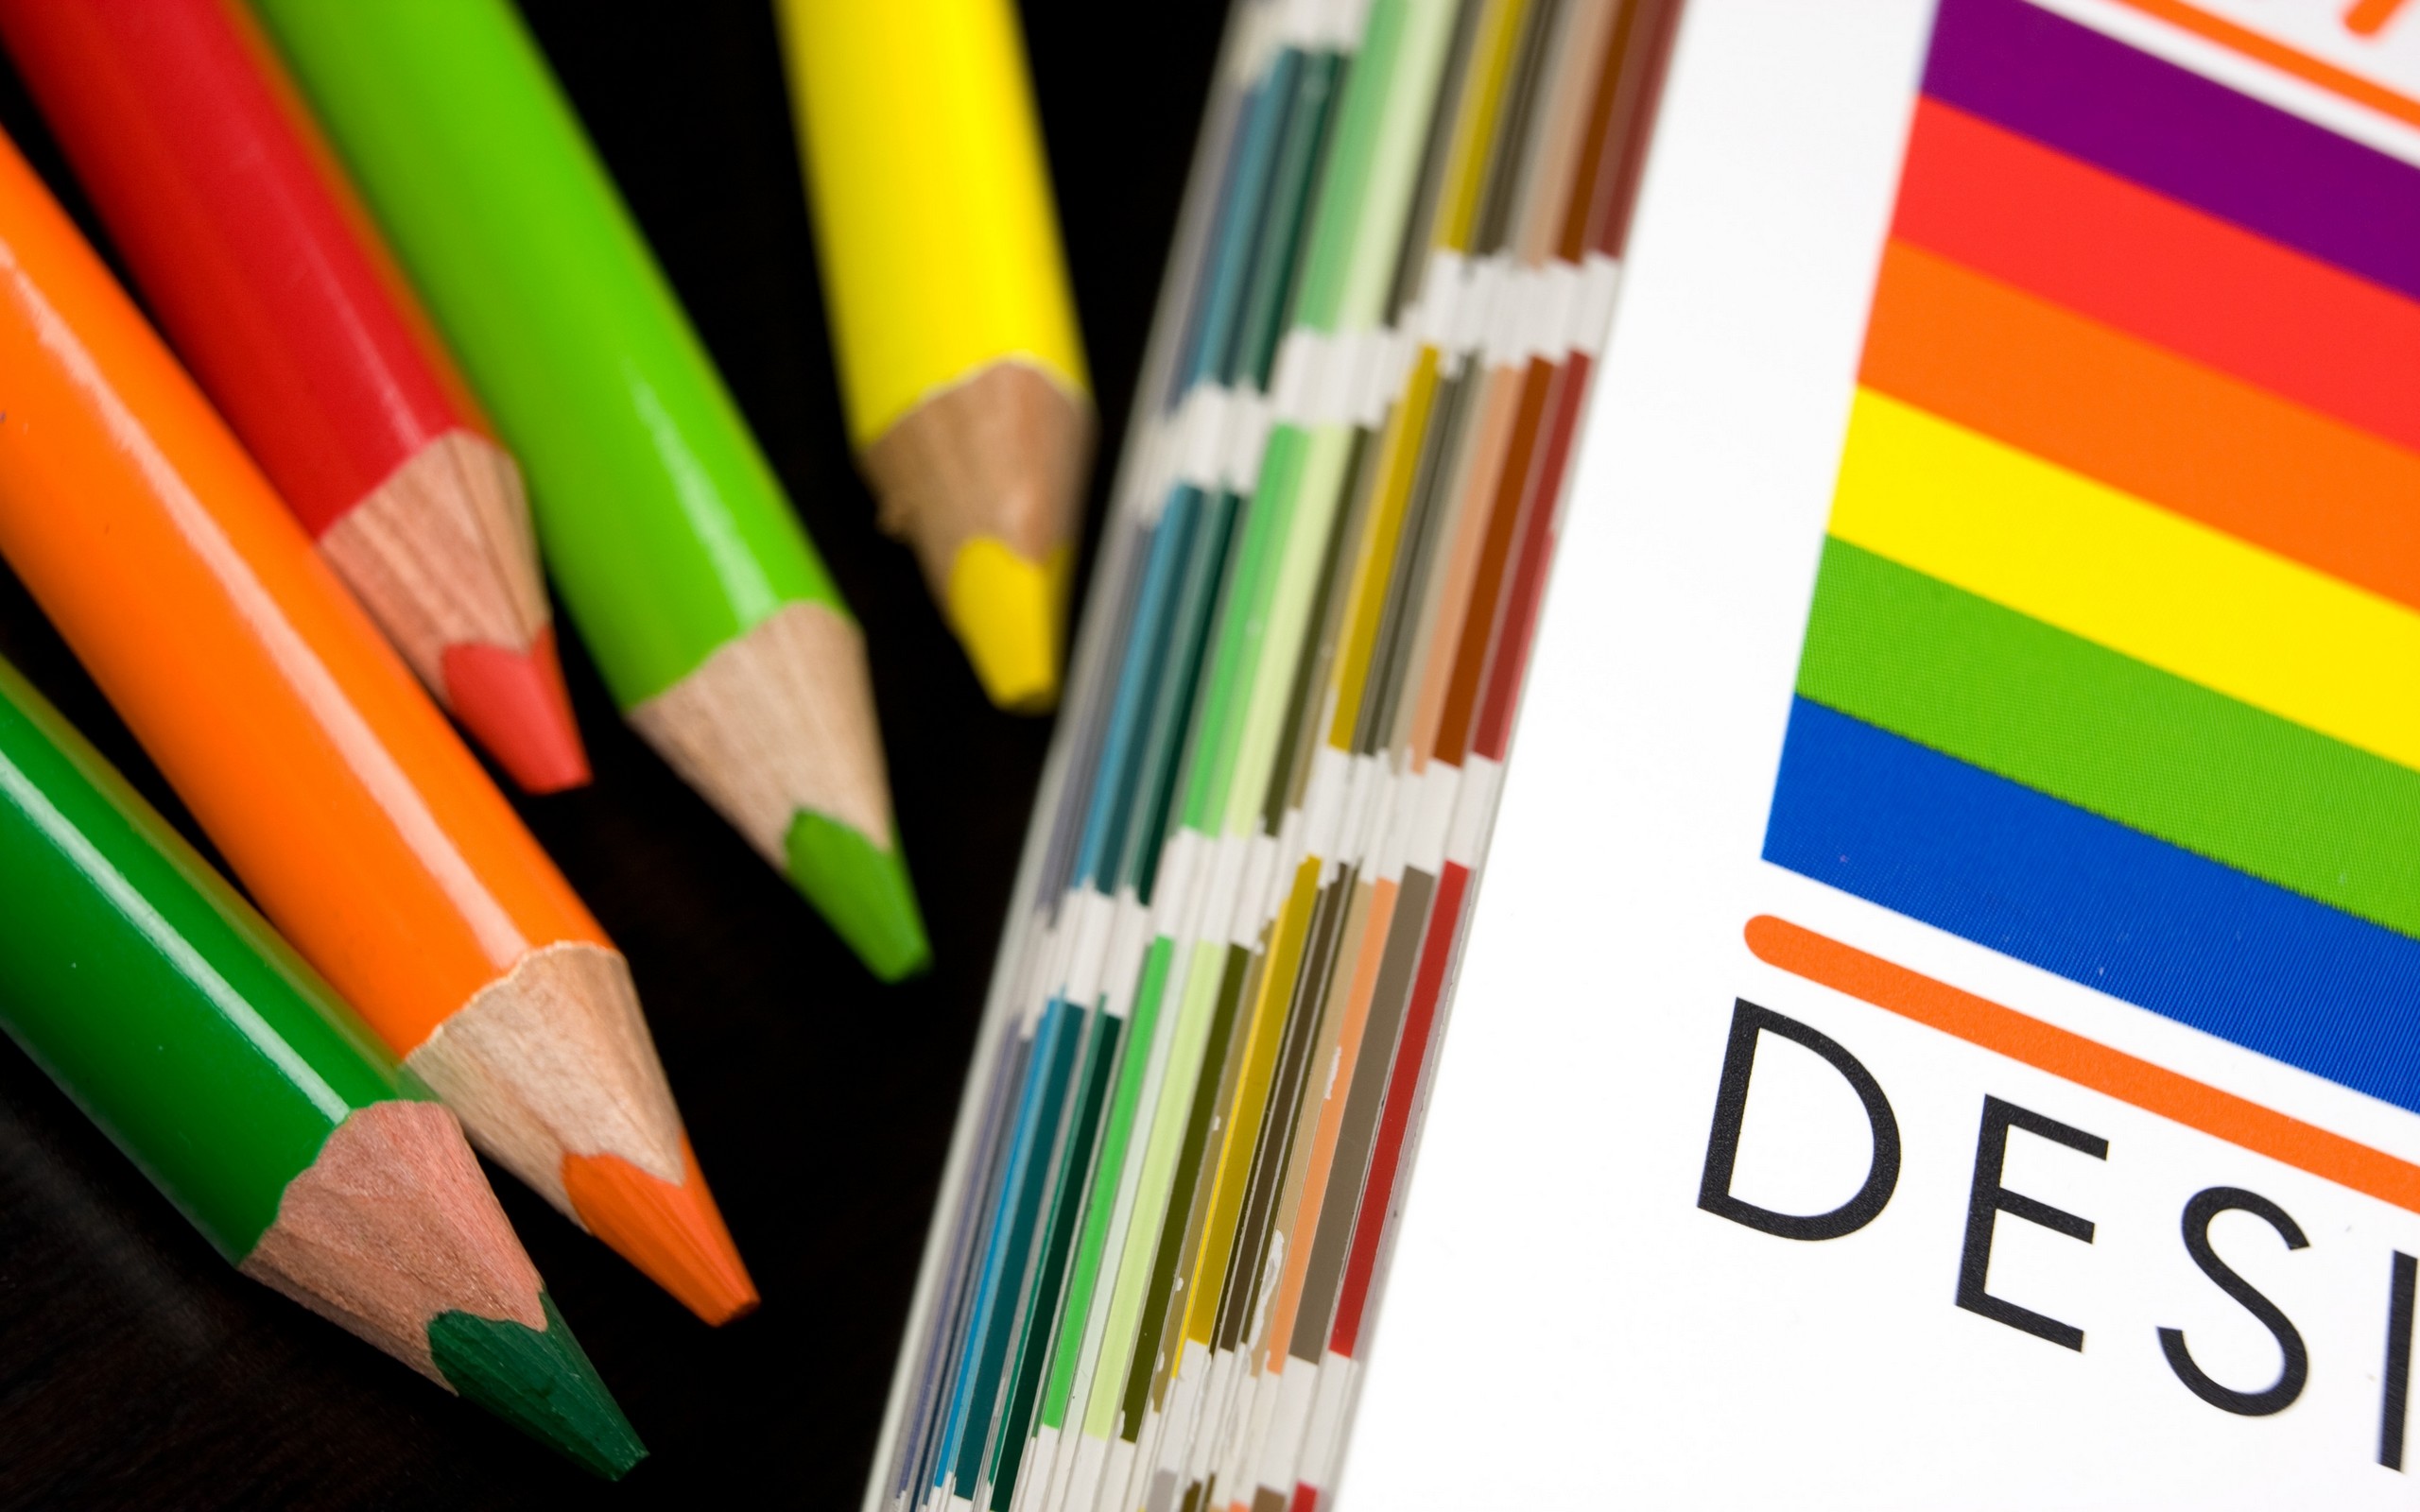 2560x1600 Pencils images Colored pencils HD wallpaper and background photos